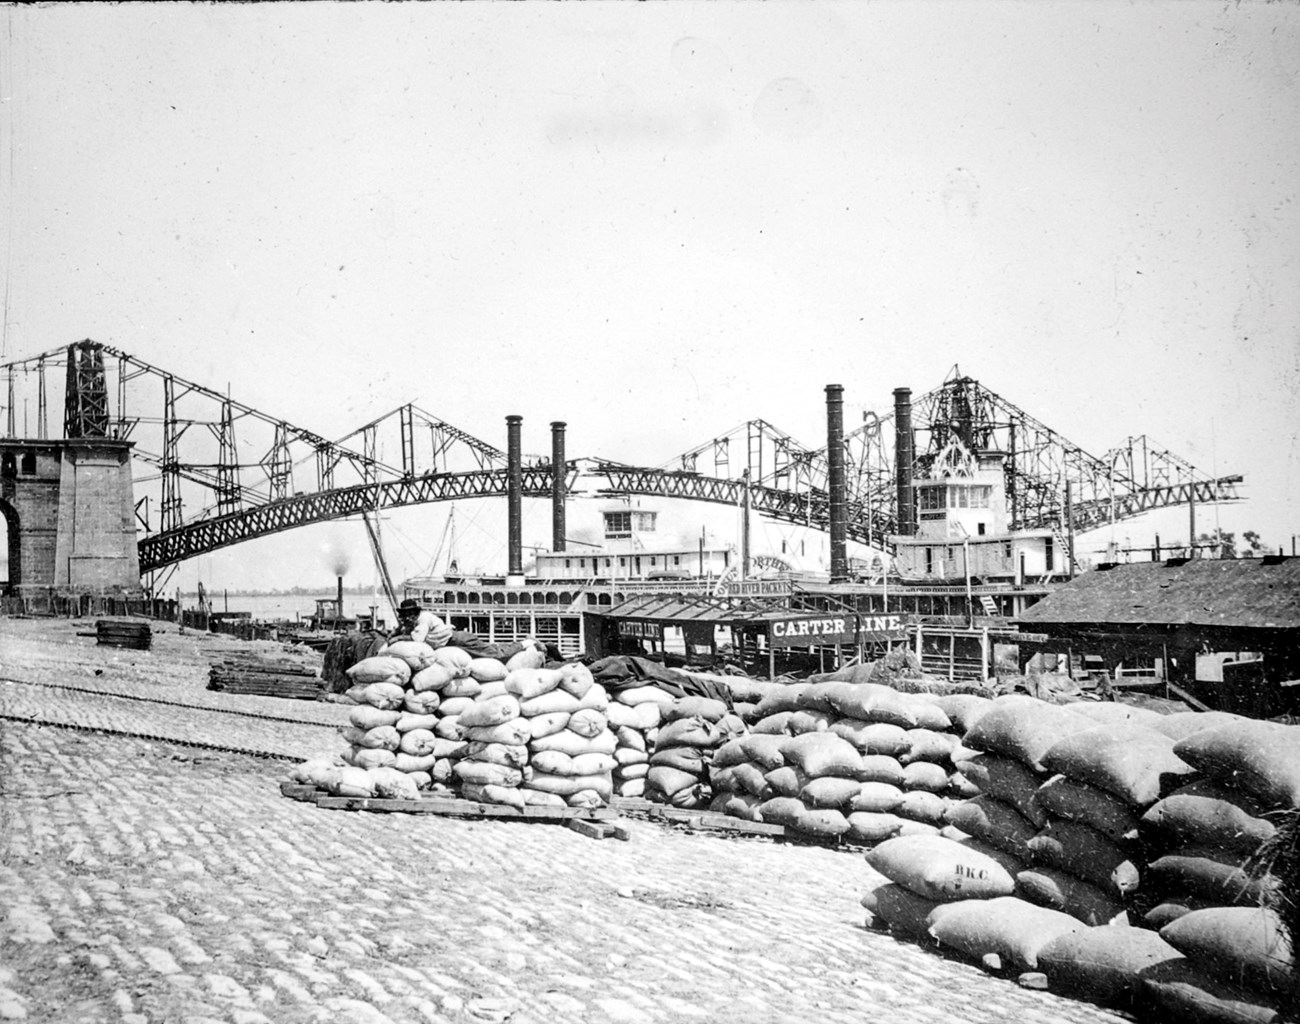 the steel frame of the bridge under construction in the background with steamboats and the cobblestone levee in the foreground